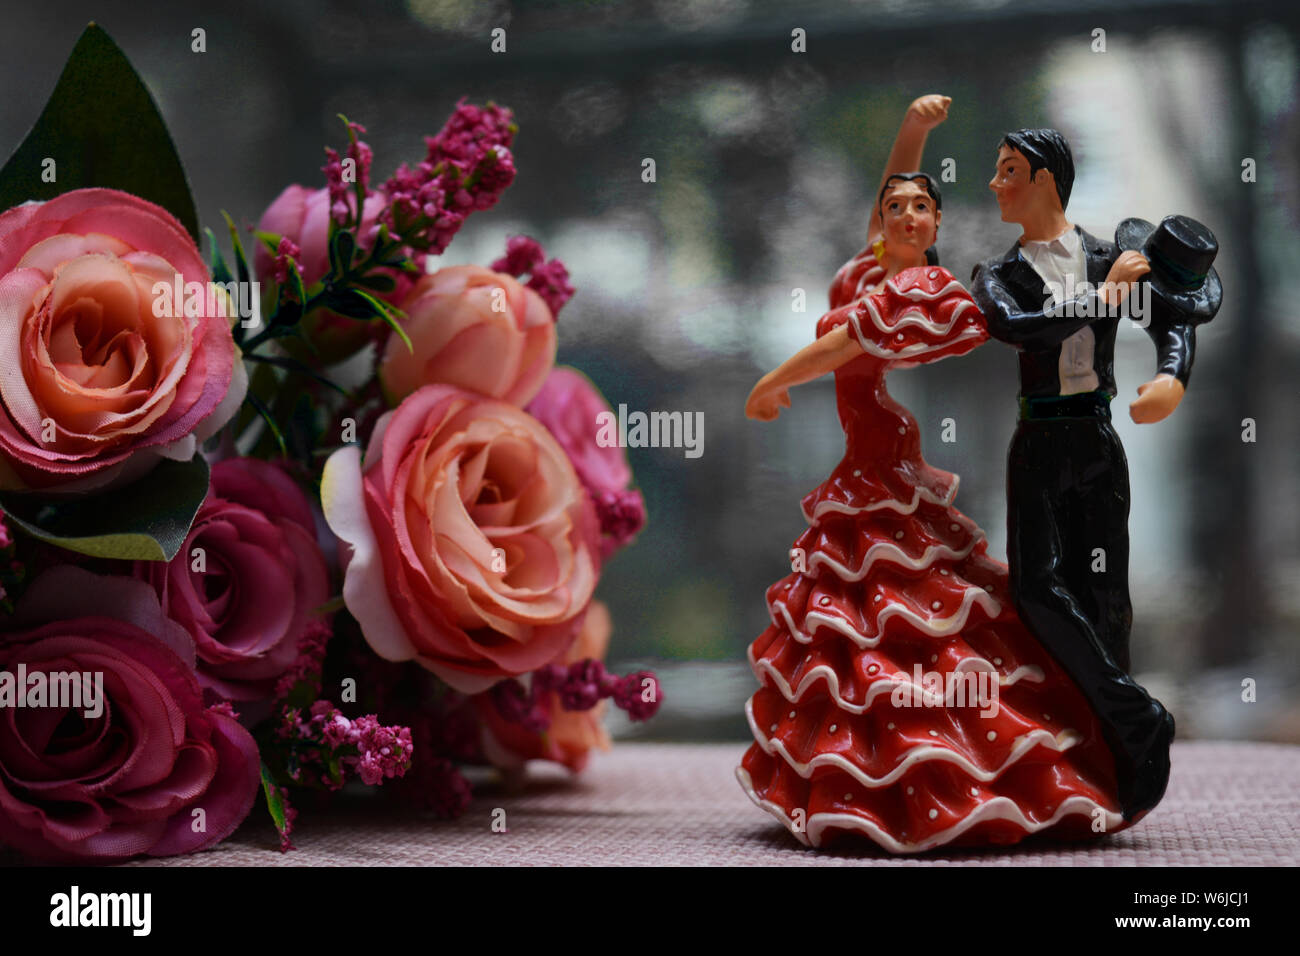 Close up of two flamenco dancers, both male and female. Figurines or souvenirs placed next to a bouquet of pink roses. Stock Photo